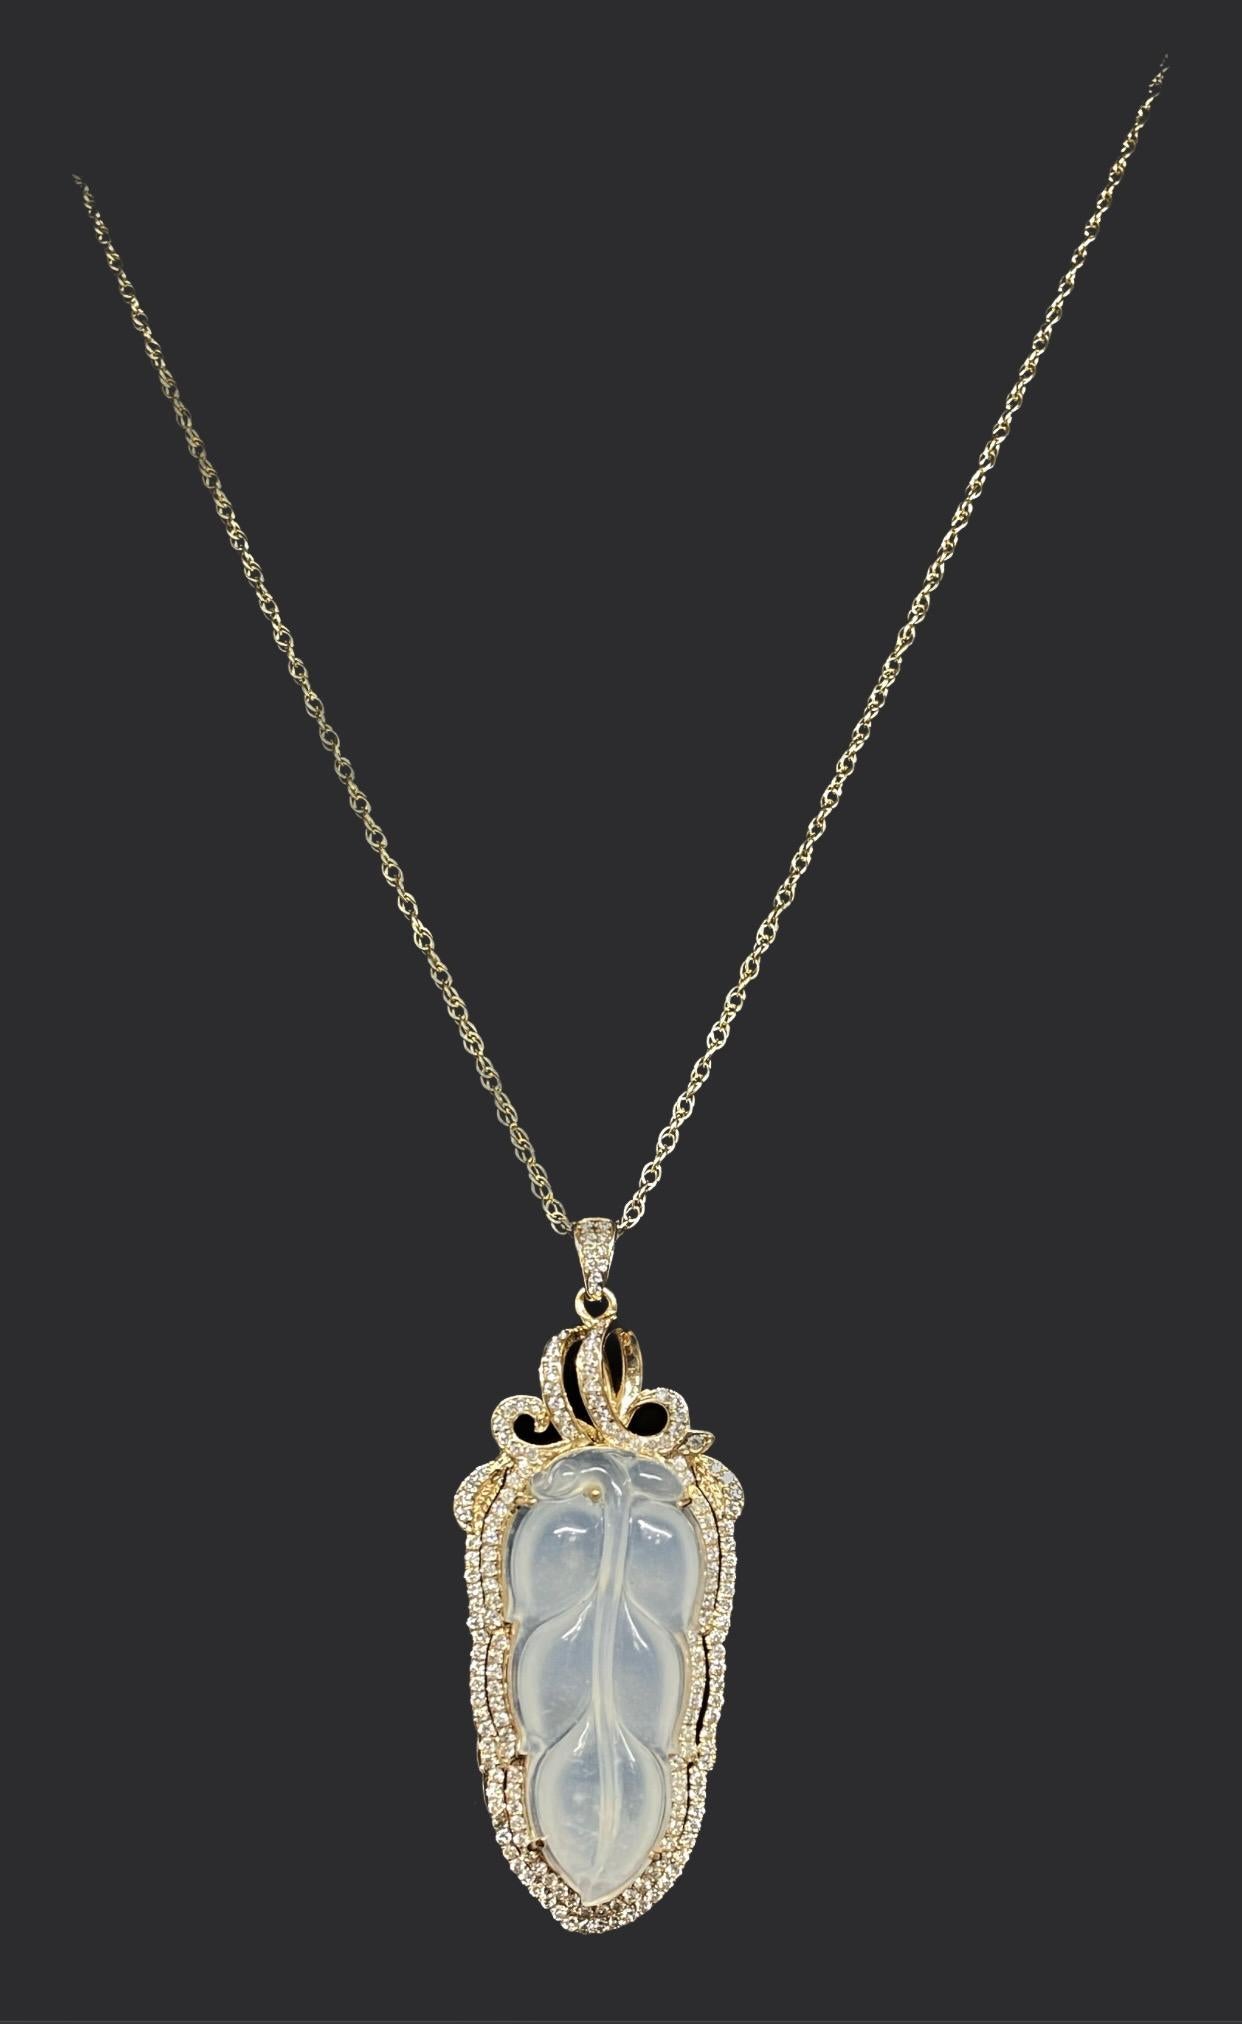 We are pleased to offer this superb and finely carved Icy Jade leaf pendant.  The glowing pendant has a double halo of sparkling round brilliant cut diamonds and set in 18k rose gold.  The luminous jade is transluscent and against the diamonds and